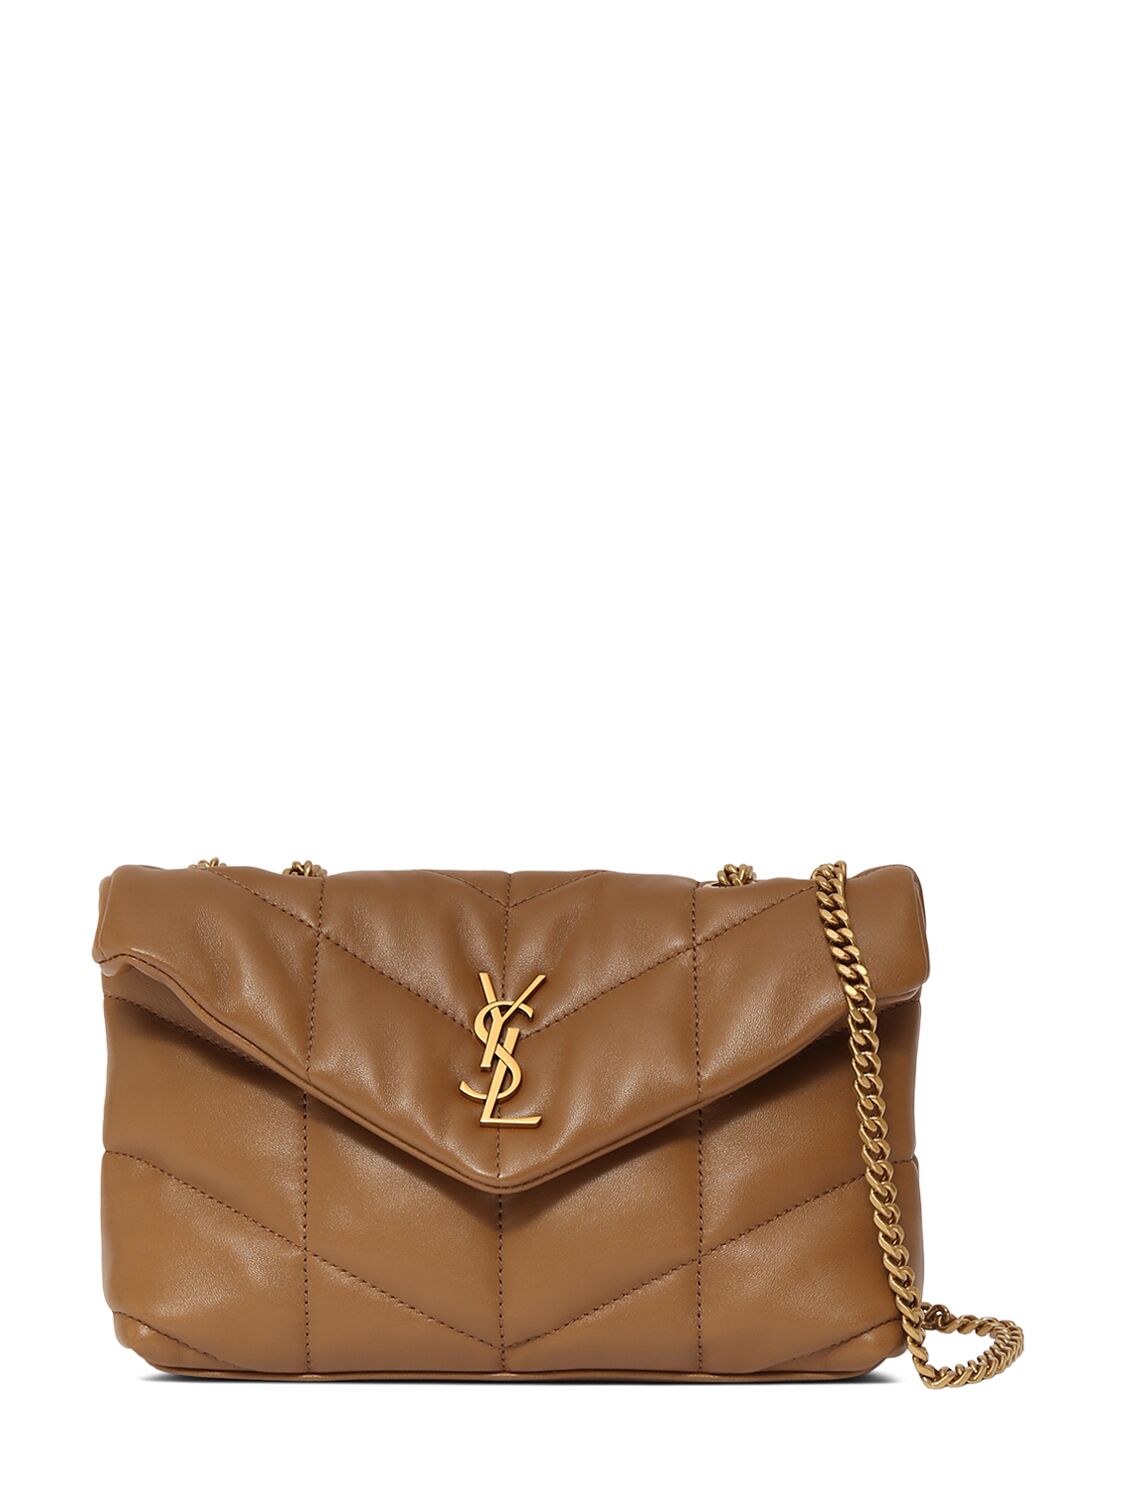 Saint Laurent Mini Toy Puffer Leather Shoulder Bag In Brown